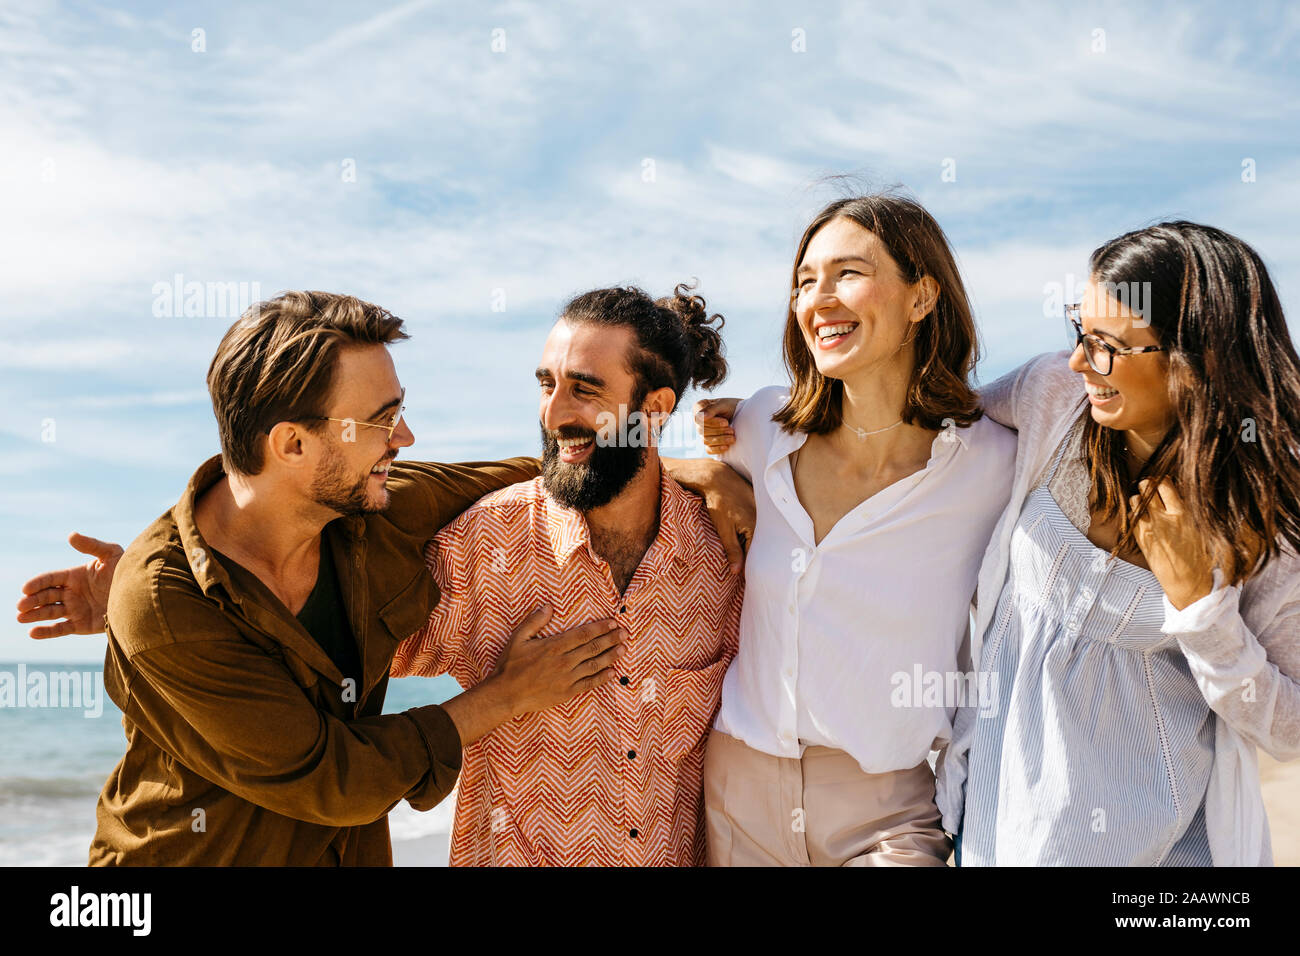 Happy friends embracing on the beach Stock Photo